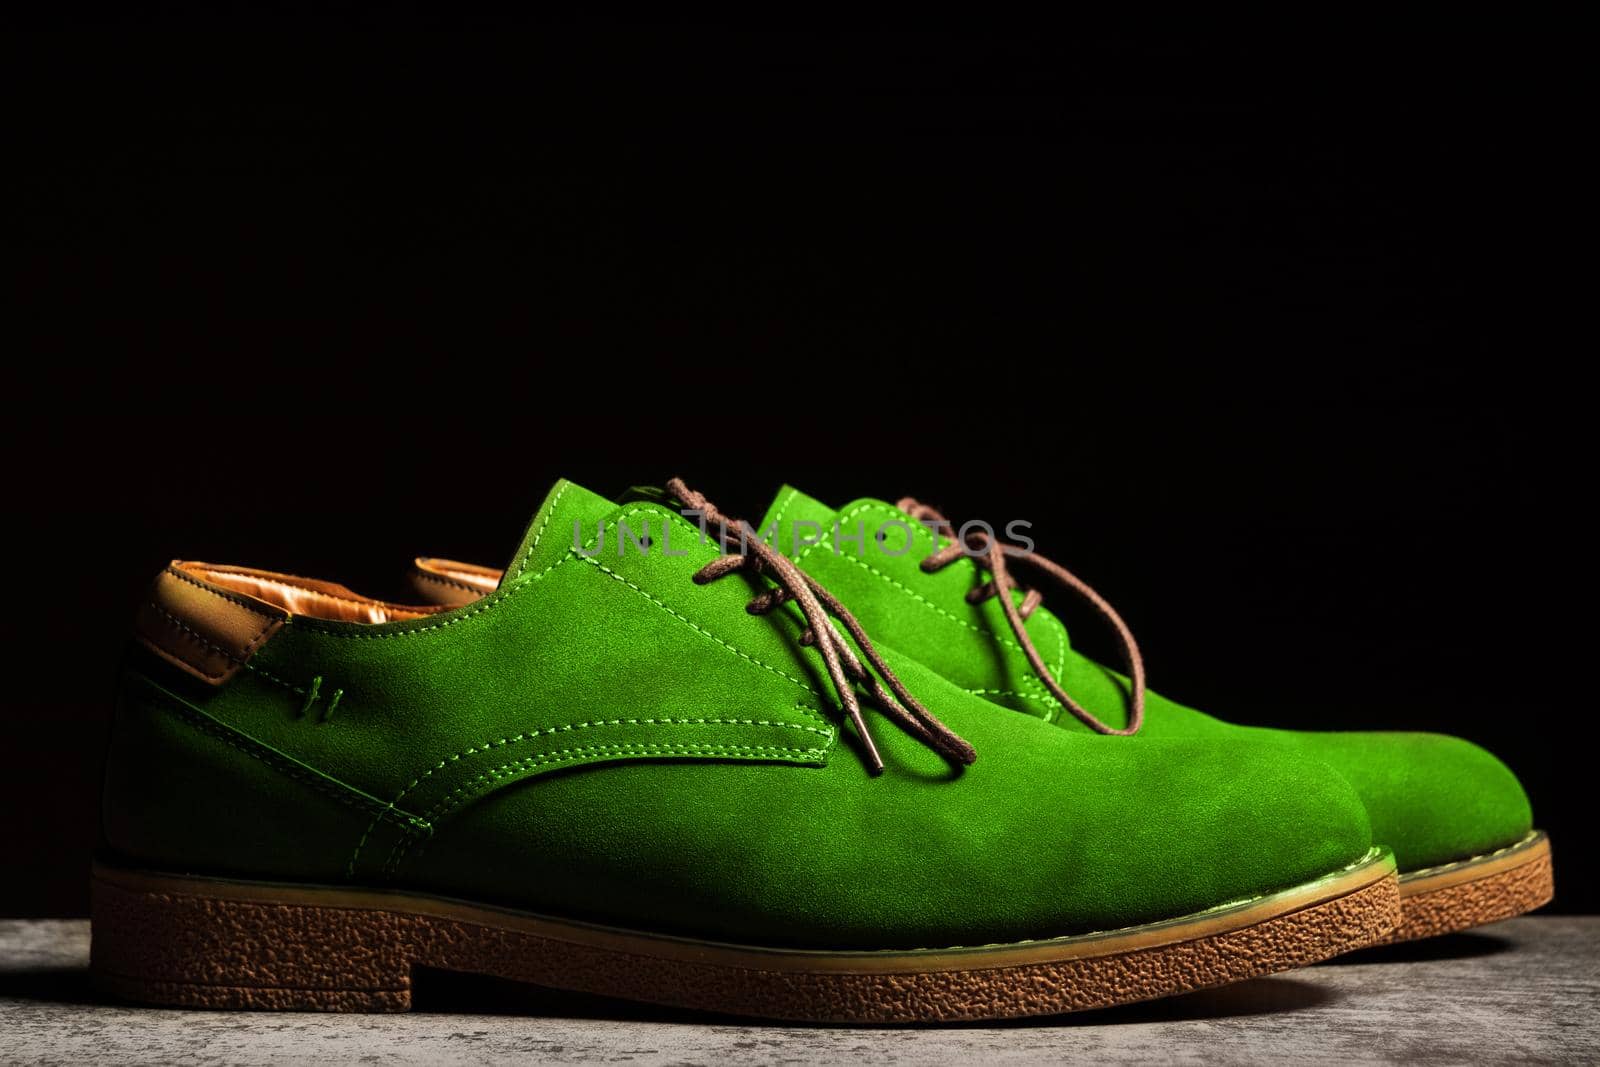 Side view of green concert shoes with laces on a black background.